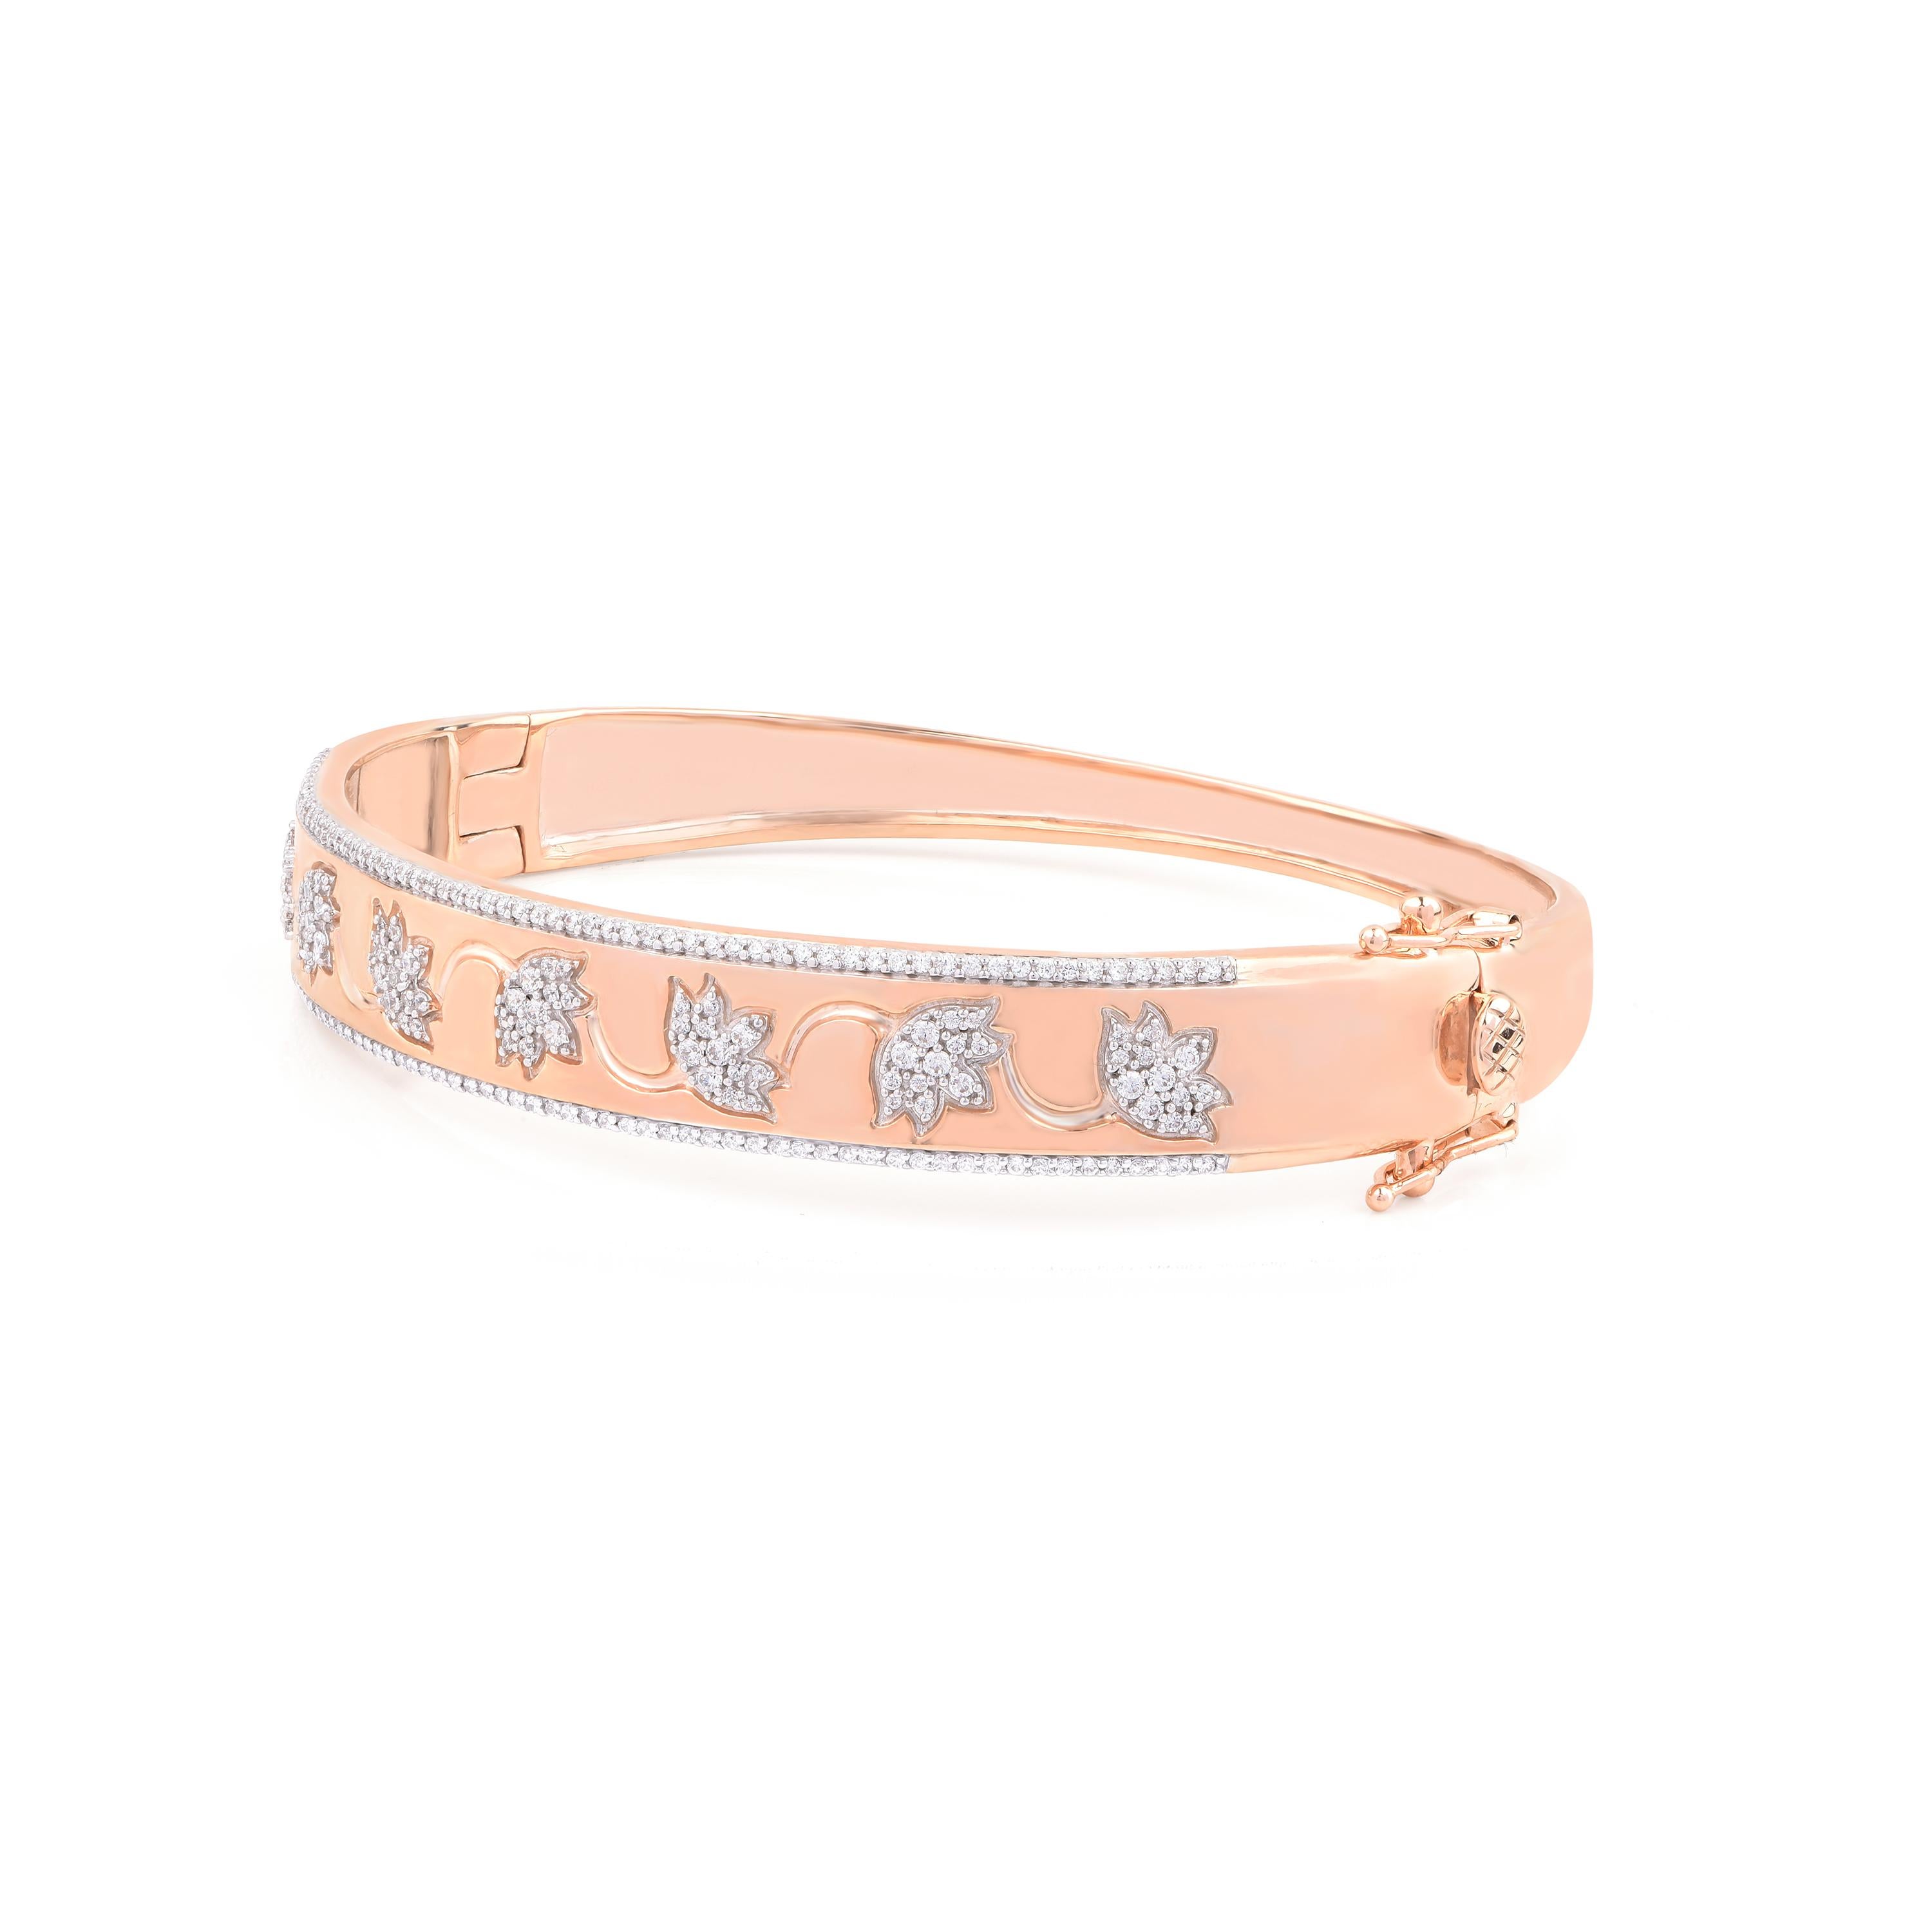 This dazzling bracelet is made by our in-house experts in 18-karat rose gold and accentuated with 210 brilliant-cut diamonds in prong setting. The total diamond weight is 1 carats and the diamonds are graded H-I Color, I2 Clarity.  Stylish as well